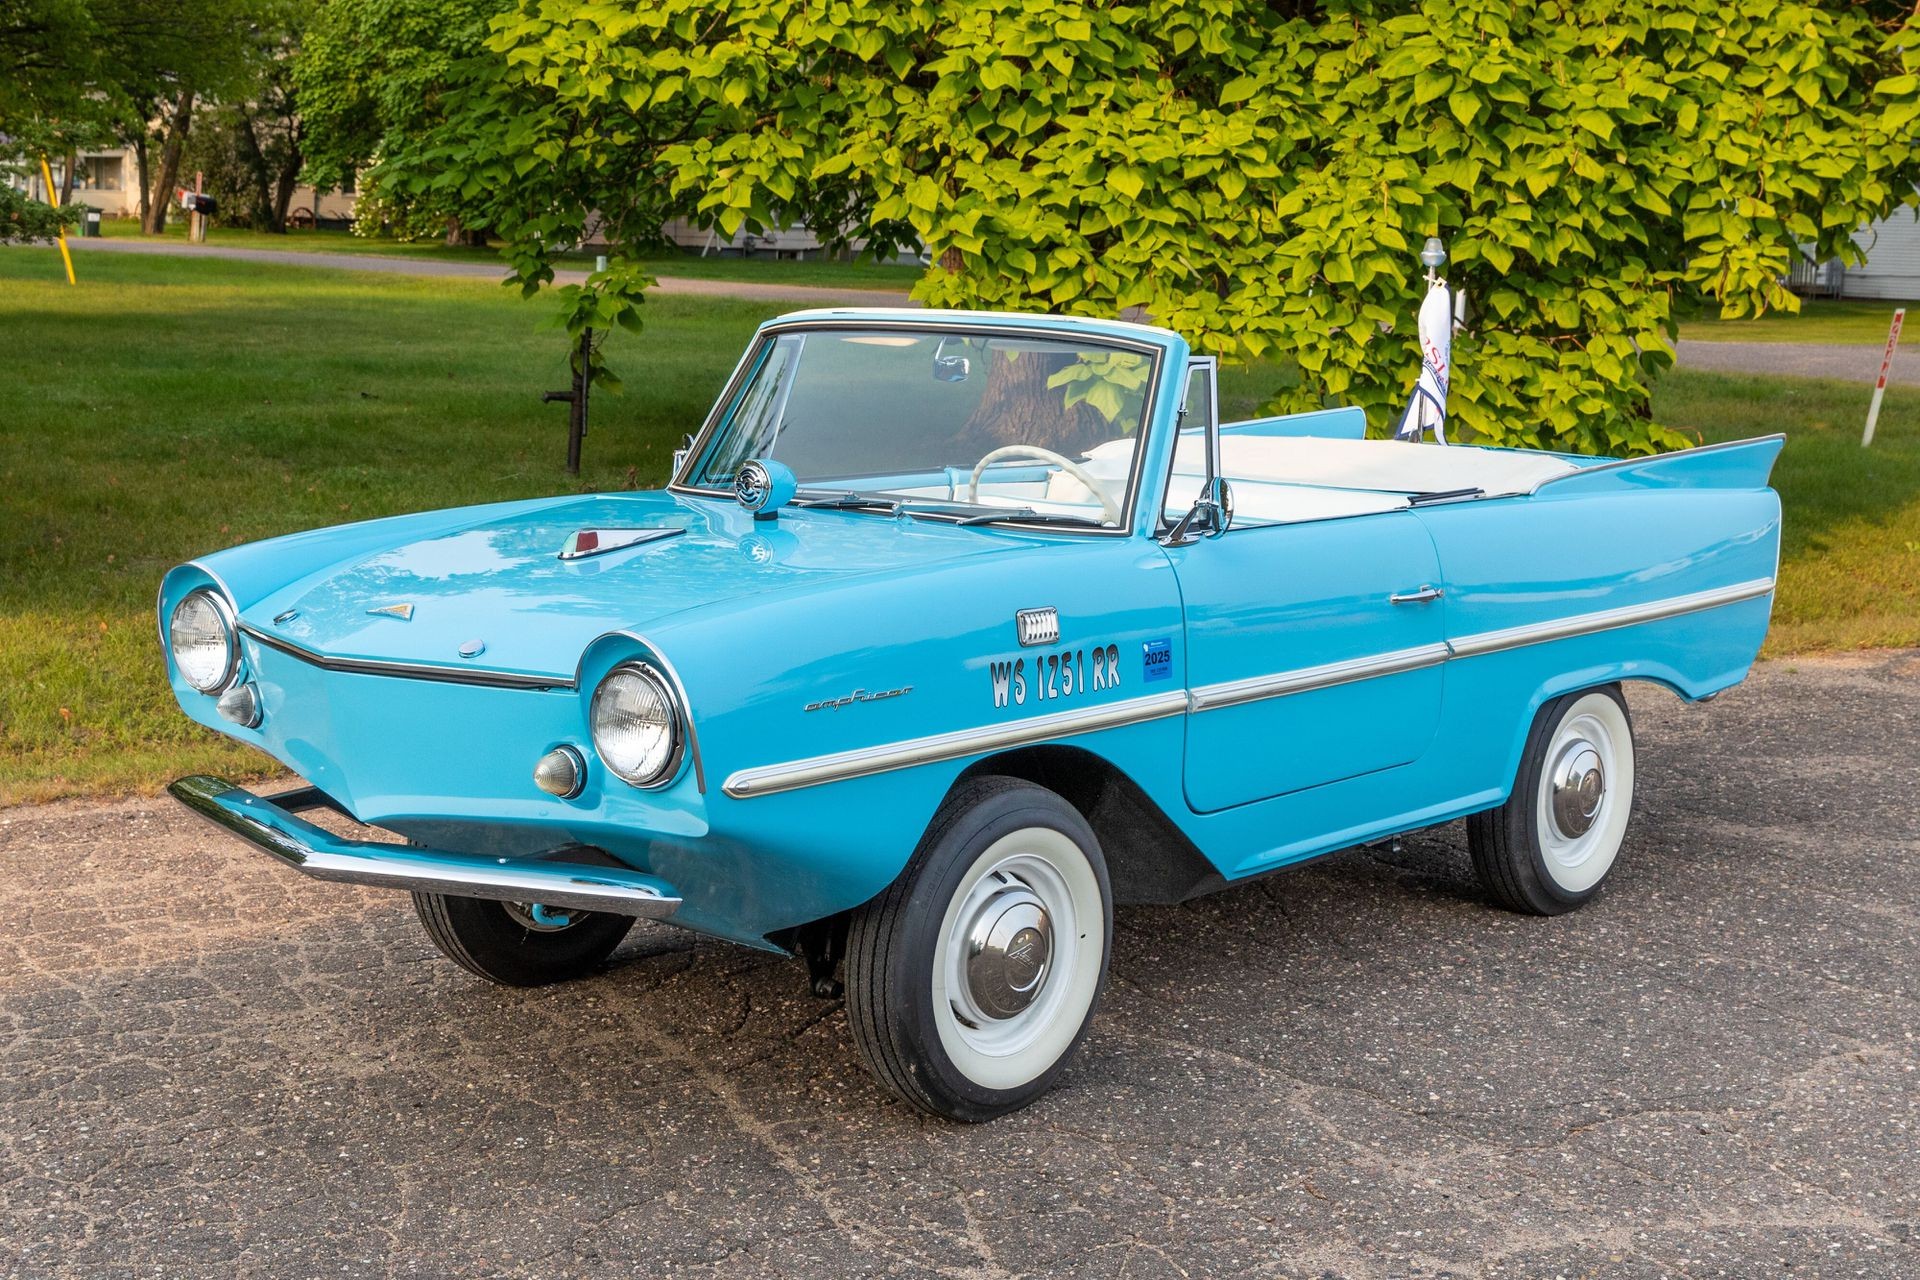 Find of the Day: This Restored 1967 Amphicar 770 Convertible is the Ultimate Crossover Vehicle